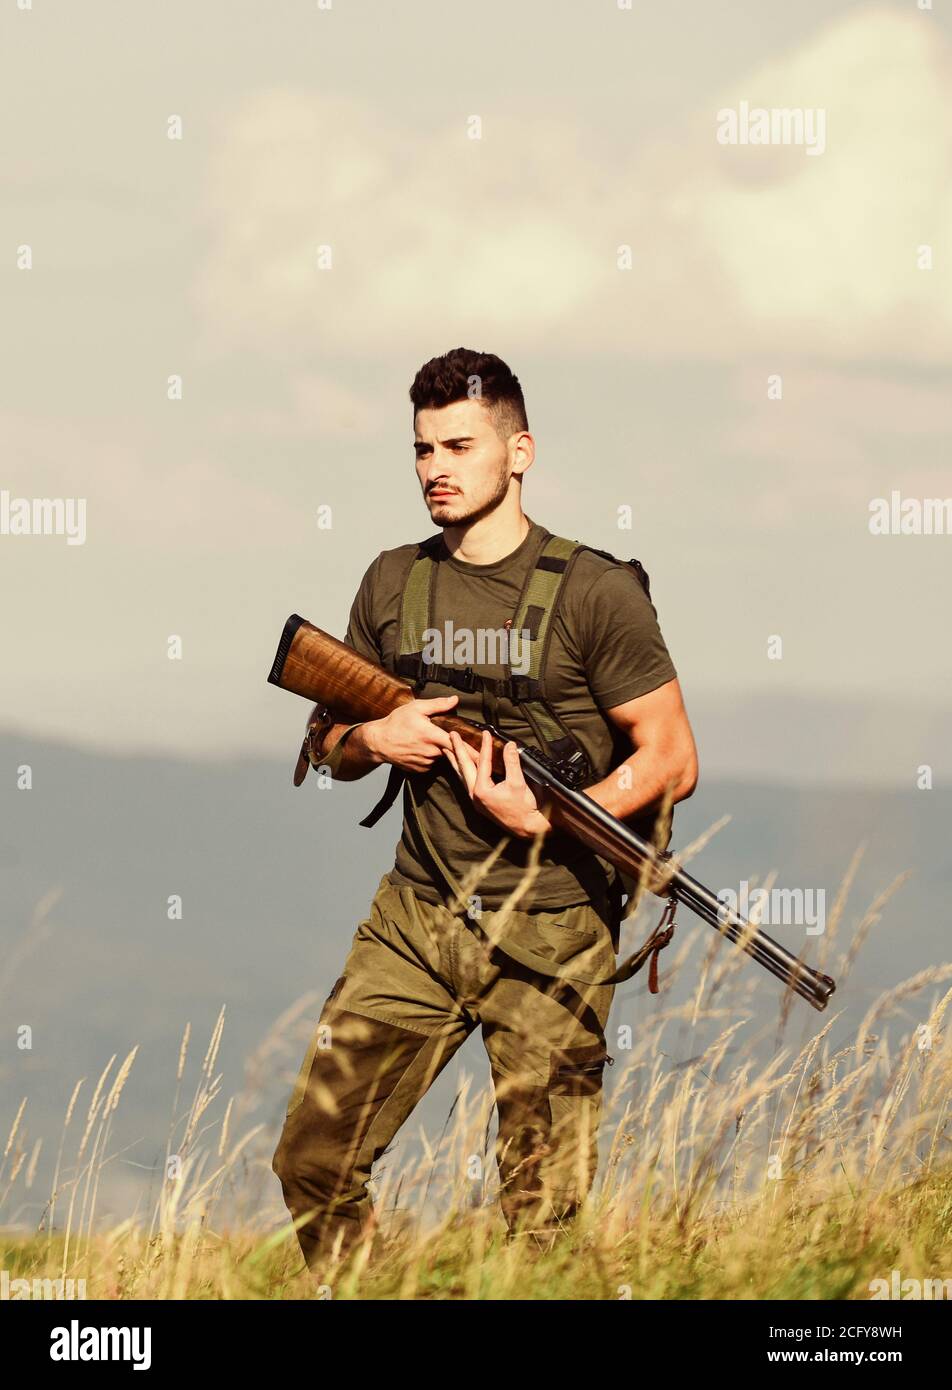 Guard the borders. Man with weapon military clothes in field nature  background. Soldier with rifle. Army forces. State border guard service.  Protecting borders of motherland. Stop illegal immigrants Stock Photo -  Alamy